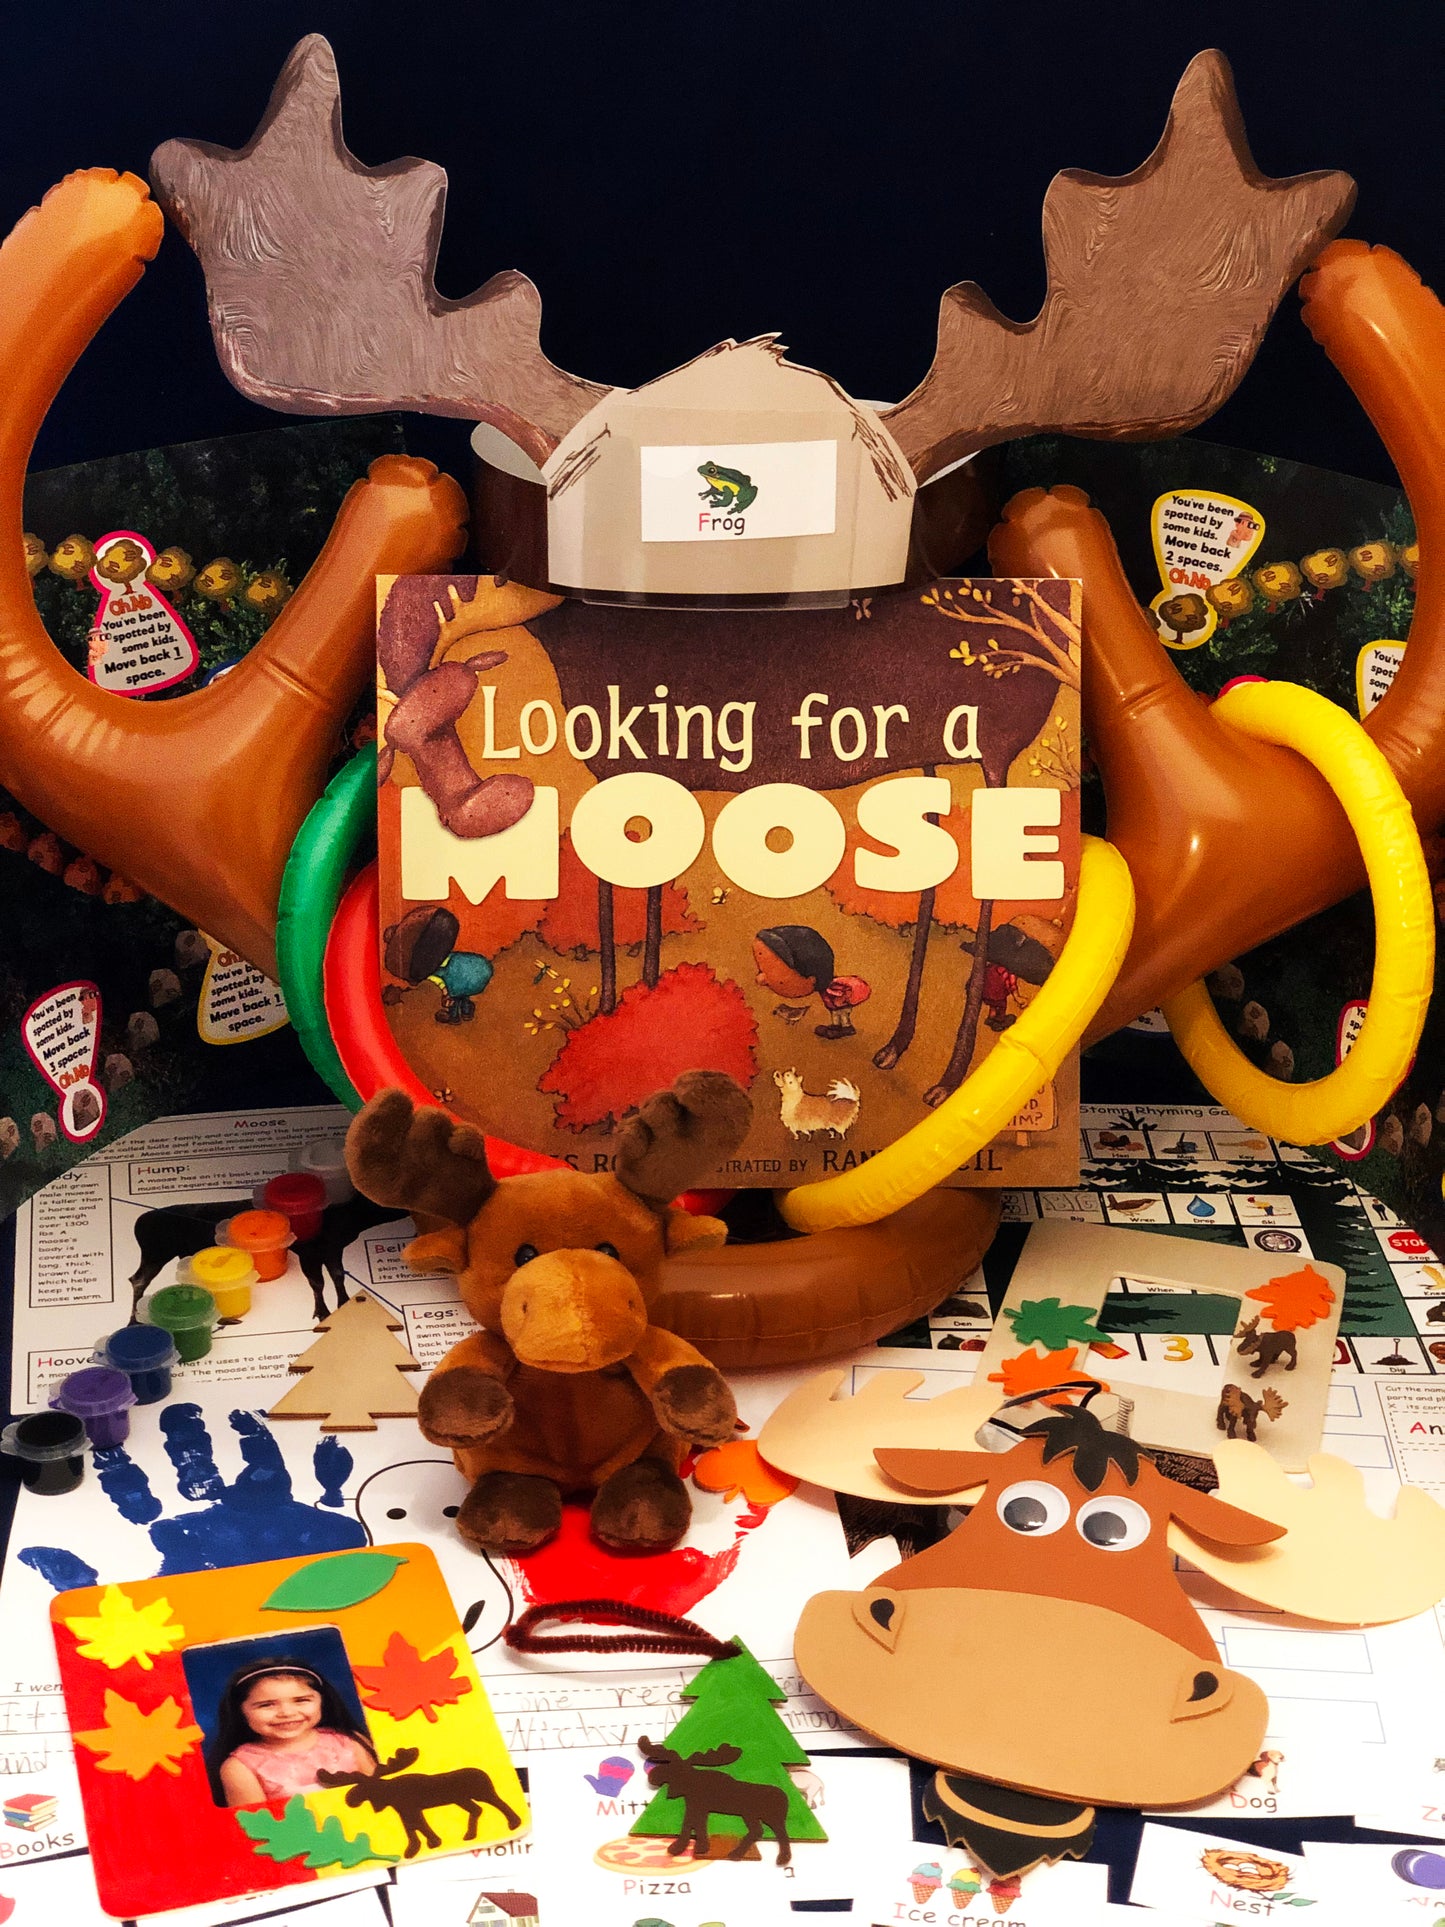 Moose themed activities